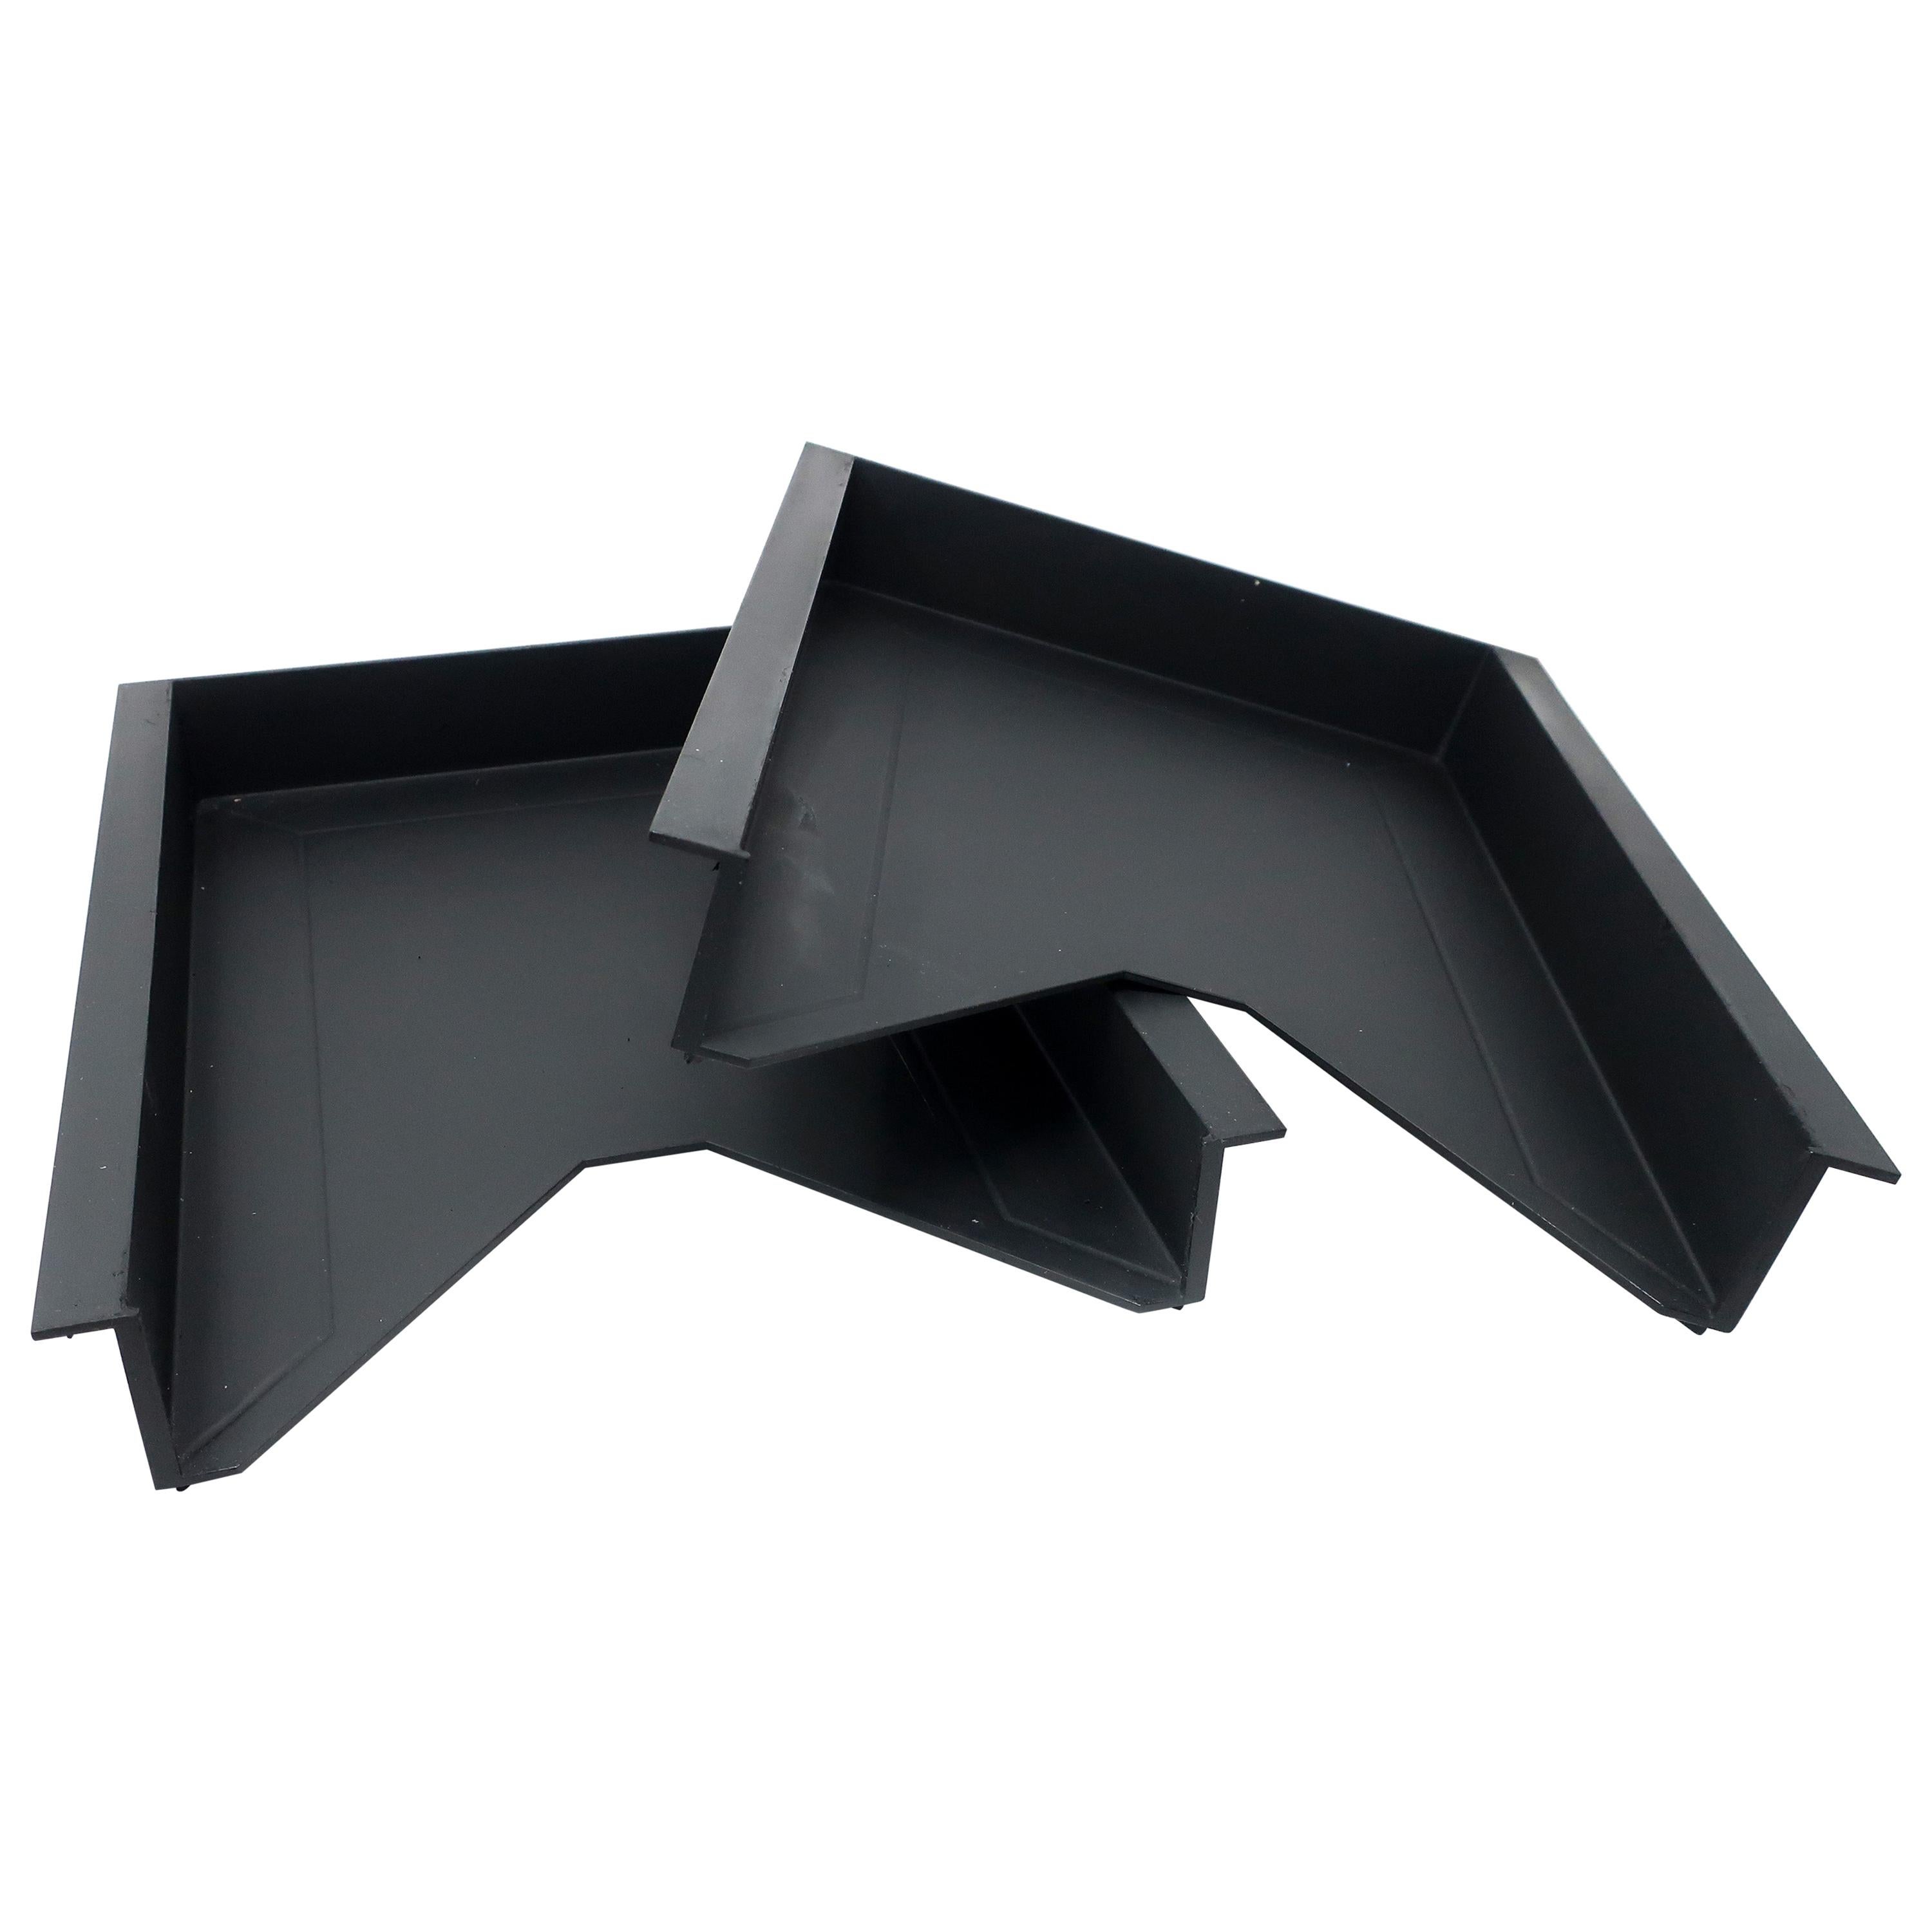 Pair of 1990s Letter Trays by Foster & Partners for Helit For Sale